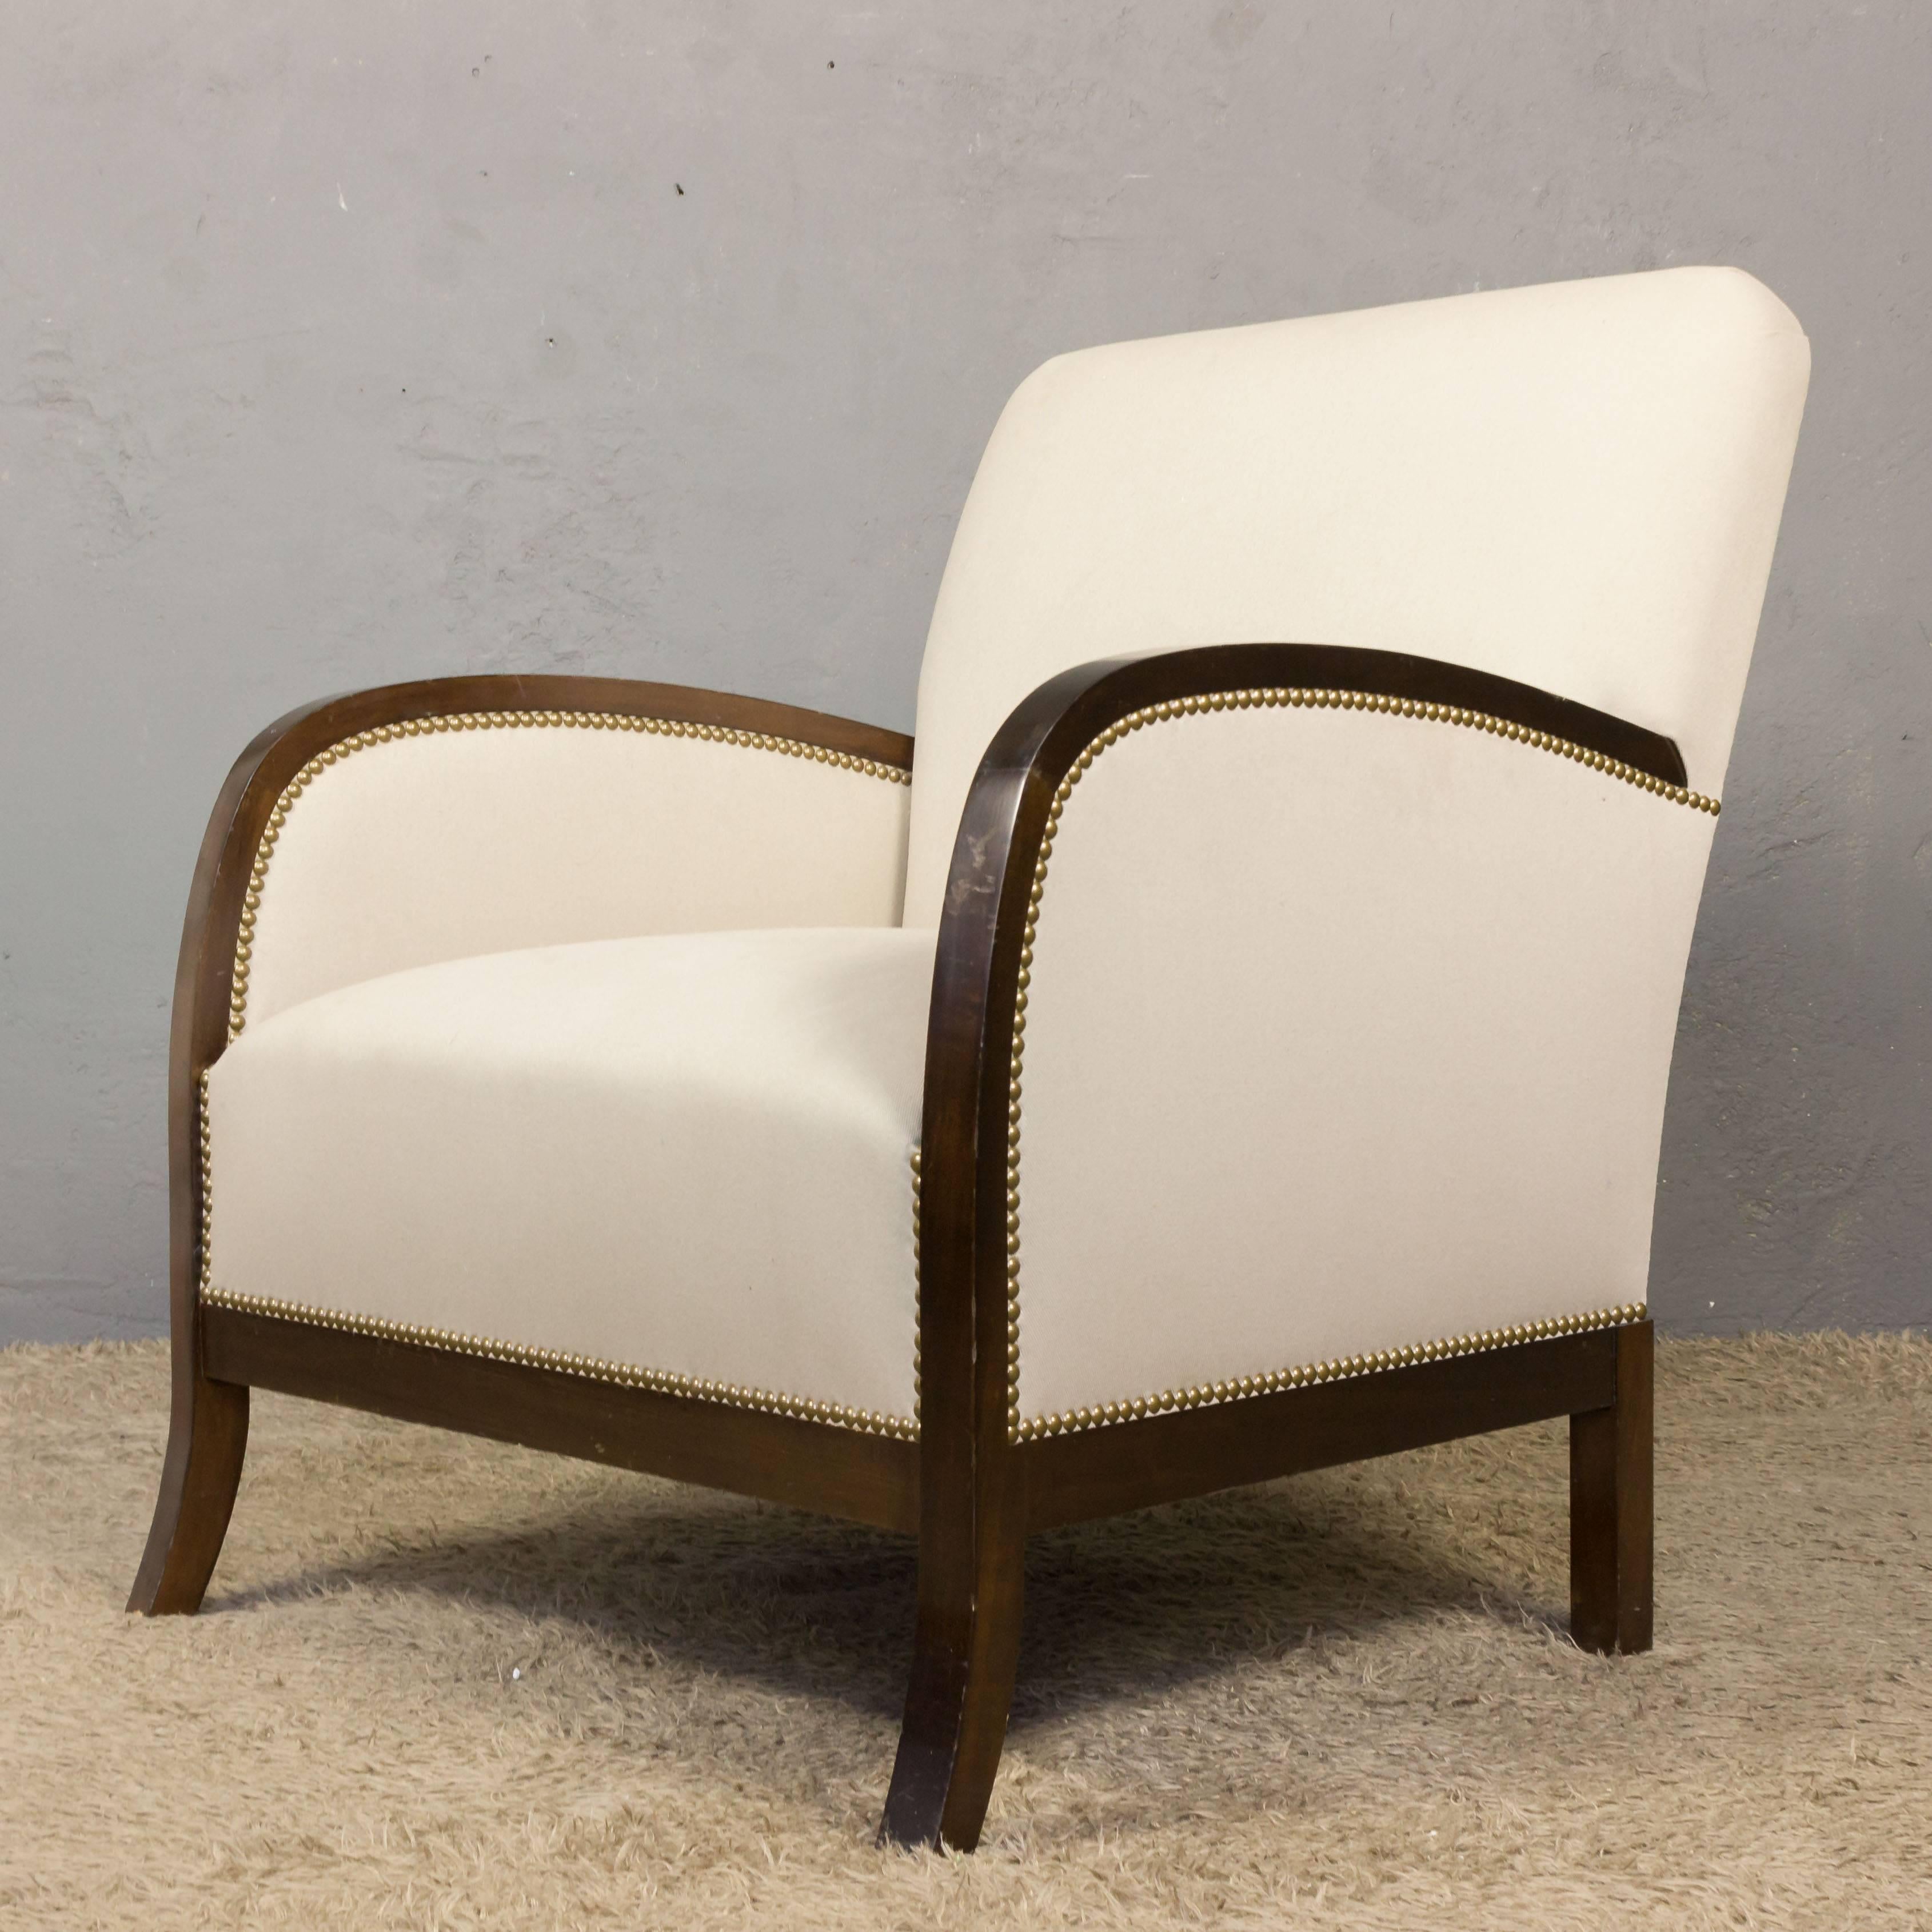 An exceptional reproduction of a French 1930s armchair. Bring a touch of classic French elegance to your home with this exquisite reproduction of a 1930s Art Deco club style armchair. Upholstered in beautiful fabric with nailhead detailing and